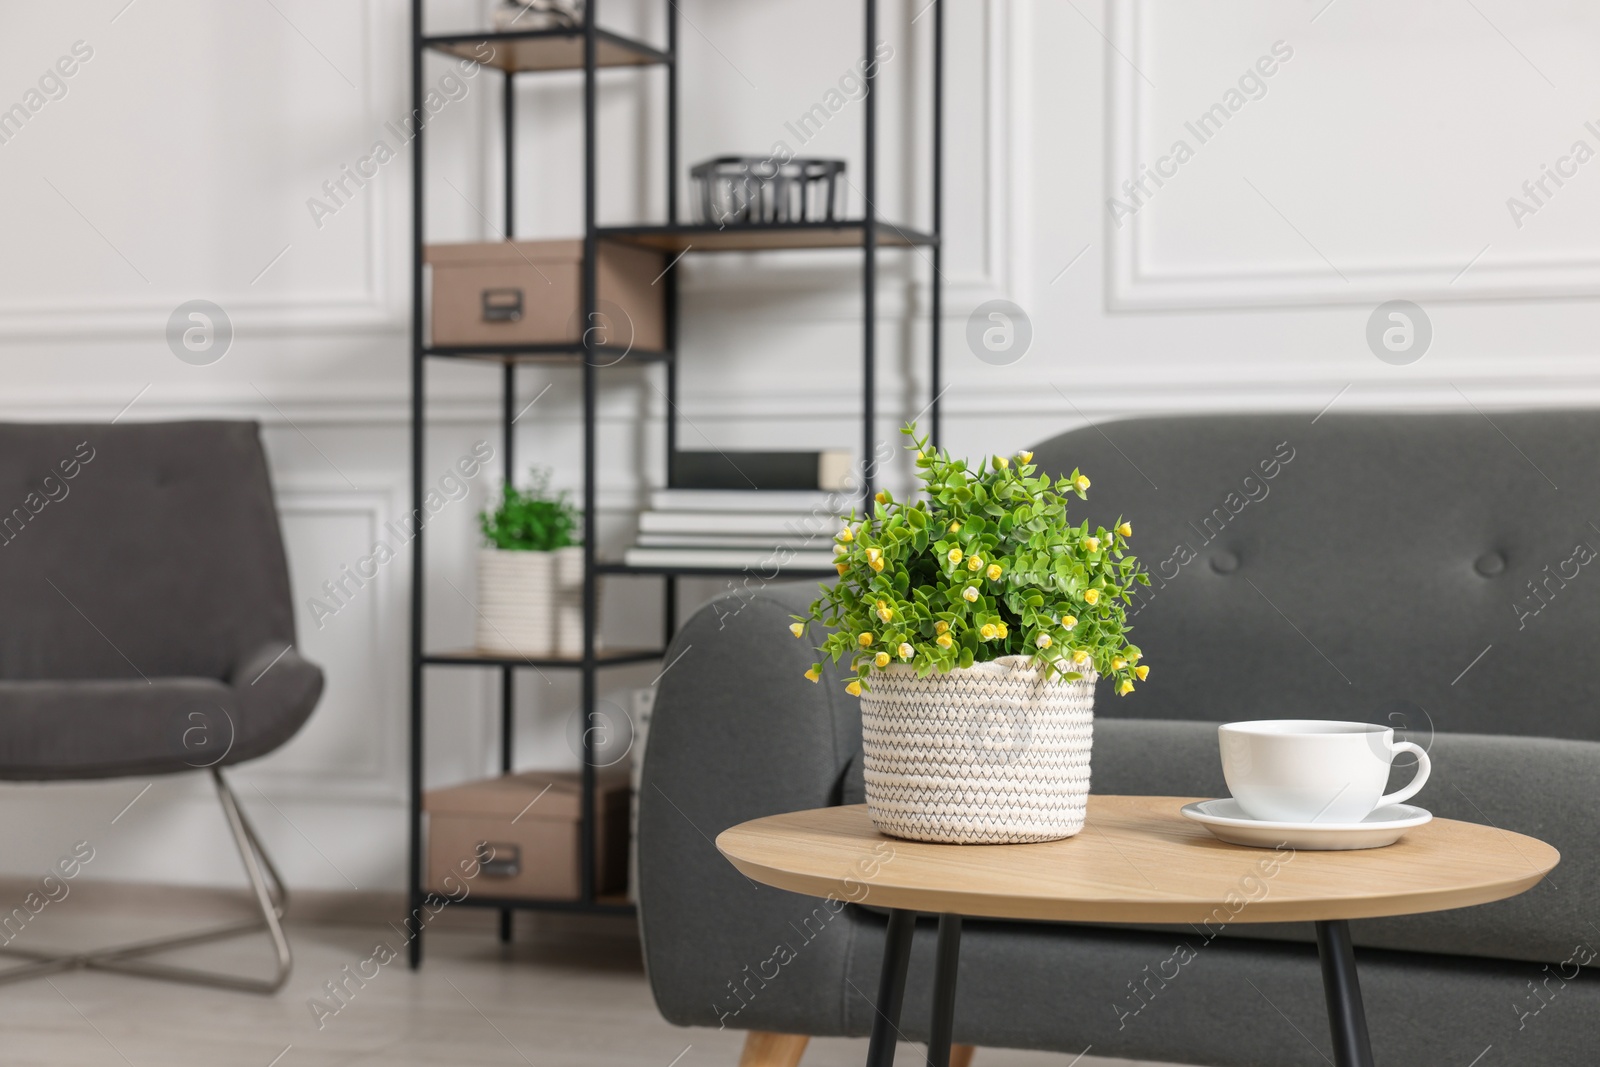 Photo of Potted artificial plant and cup of drink on coffee table near sofa indoors